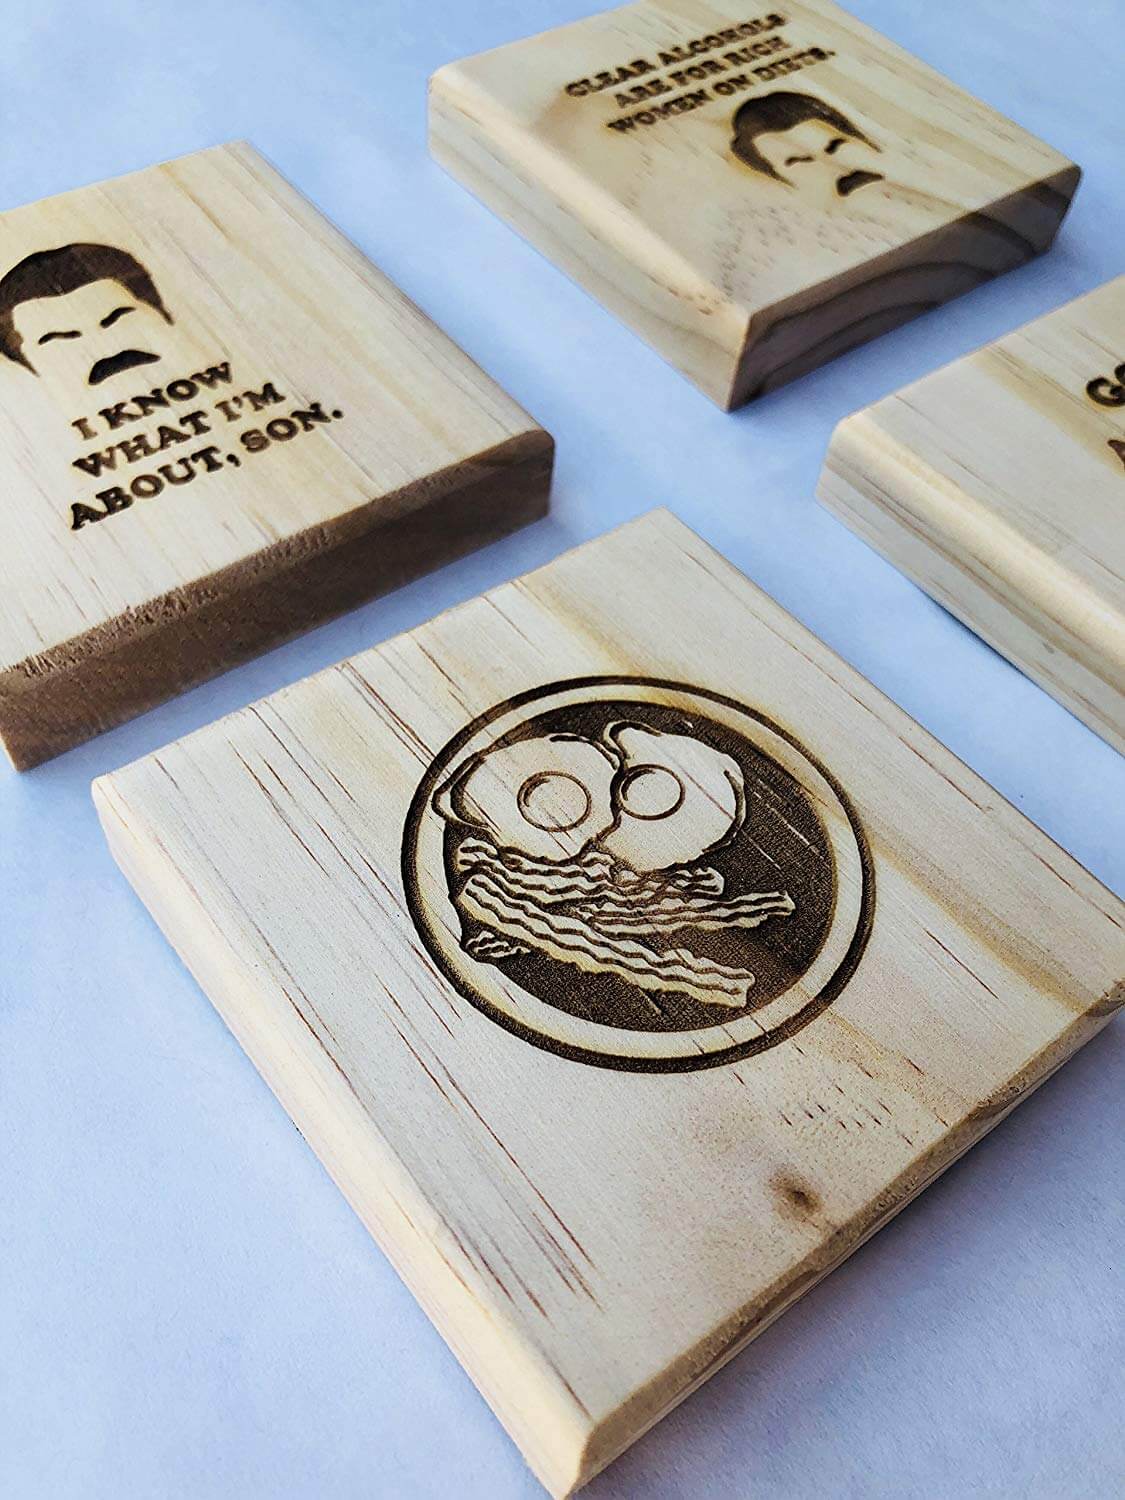 Ron Swanson Coasters: Permanent Engraved Gift Set of 4 Wood Coasters